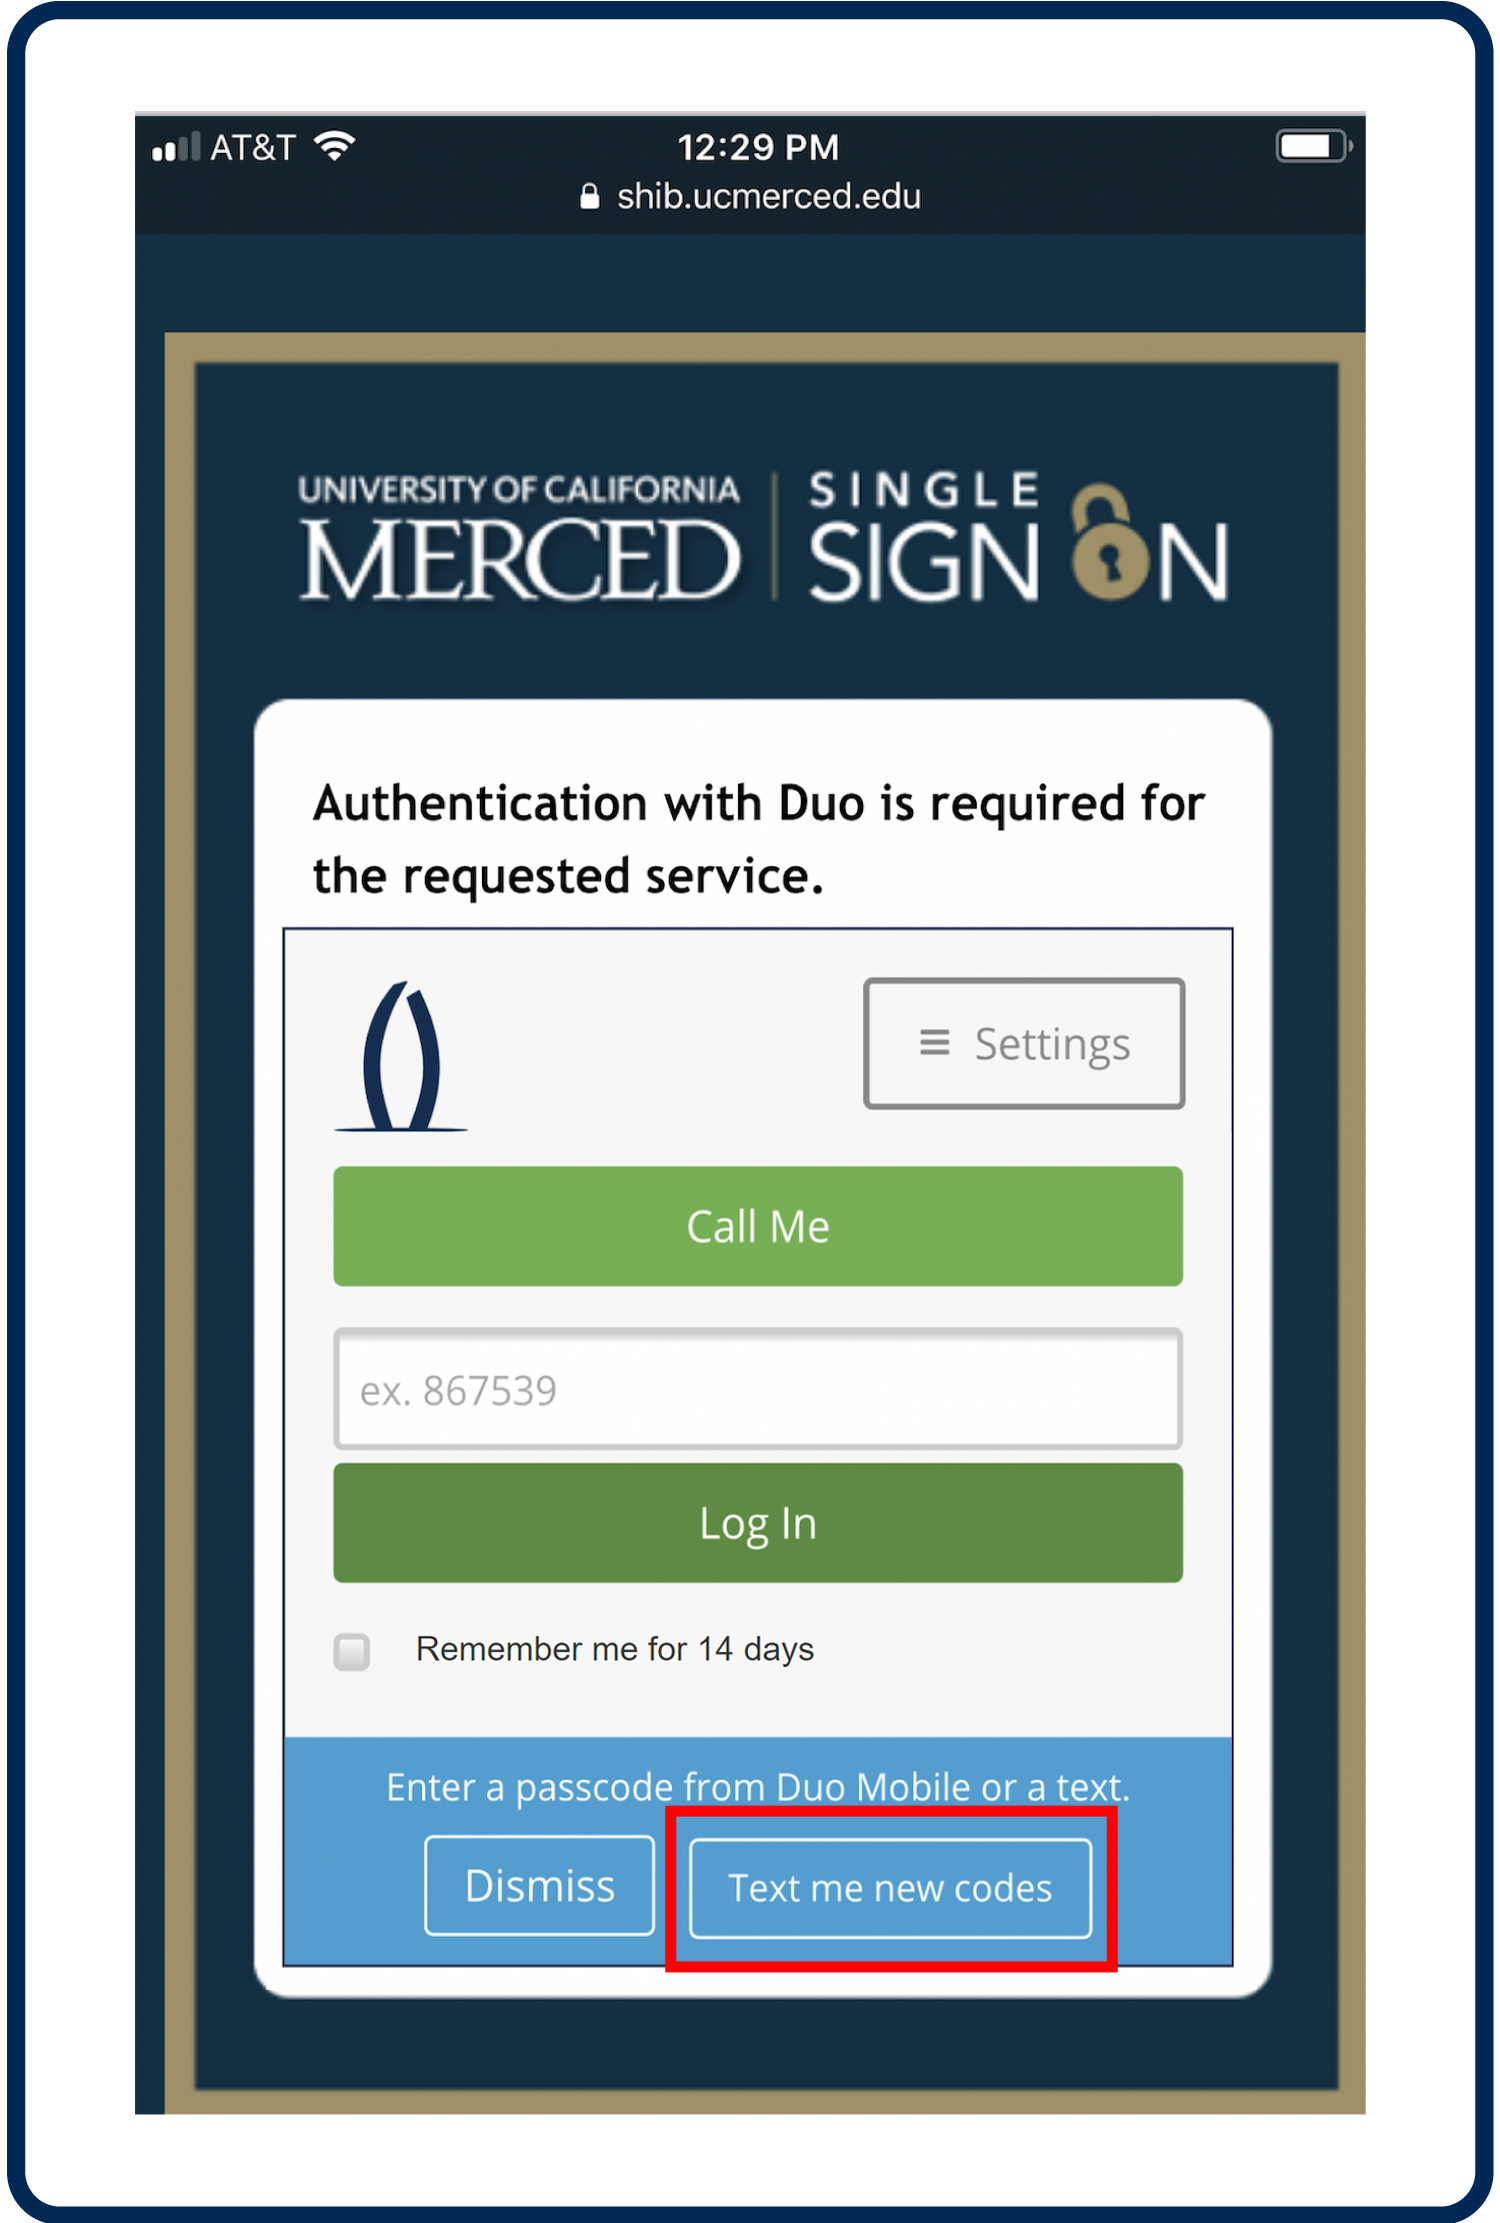 Screenshot of UC Merced Single Sign On page with a box around the "Text me new codes" button on the bottom right of the page.